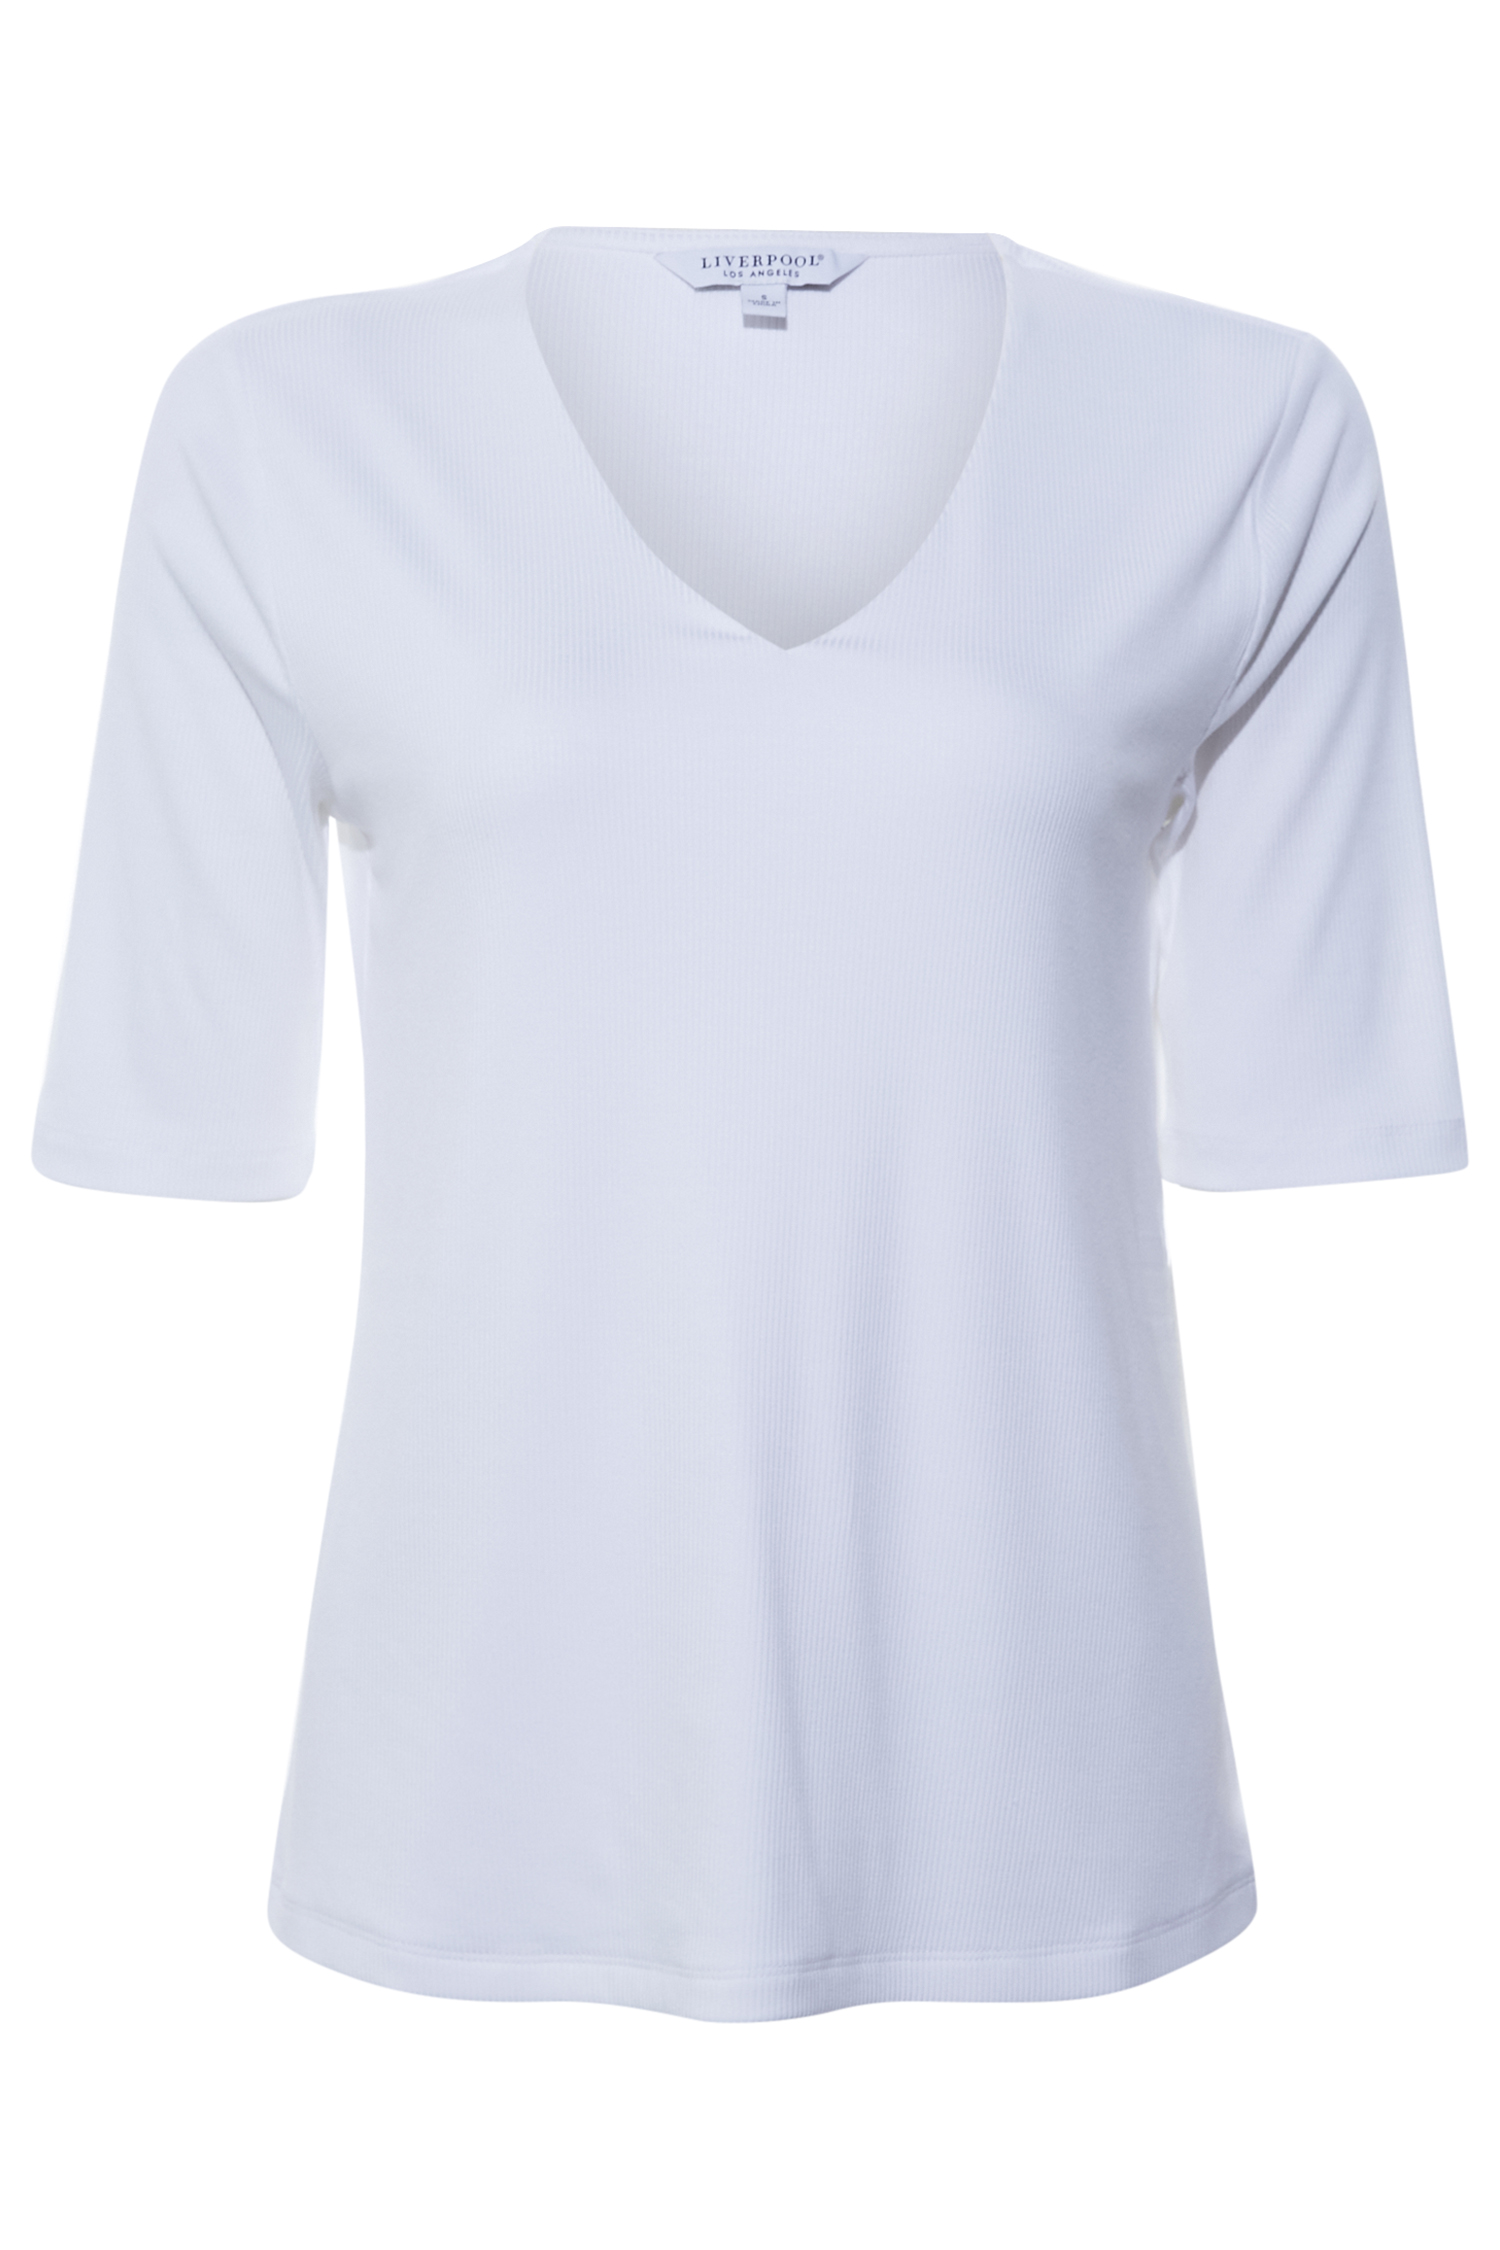 Liverpool Double Layer V-Neck Top